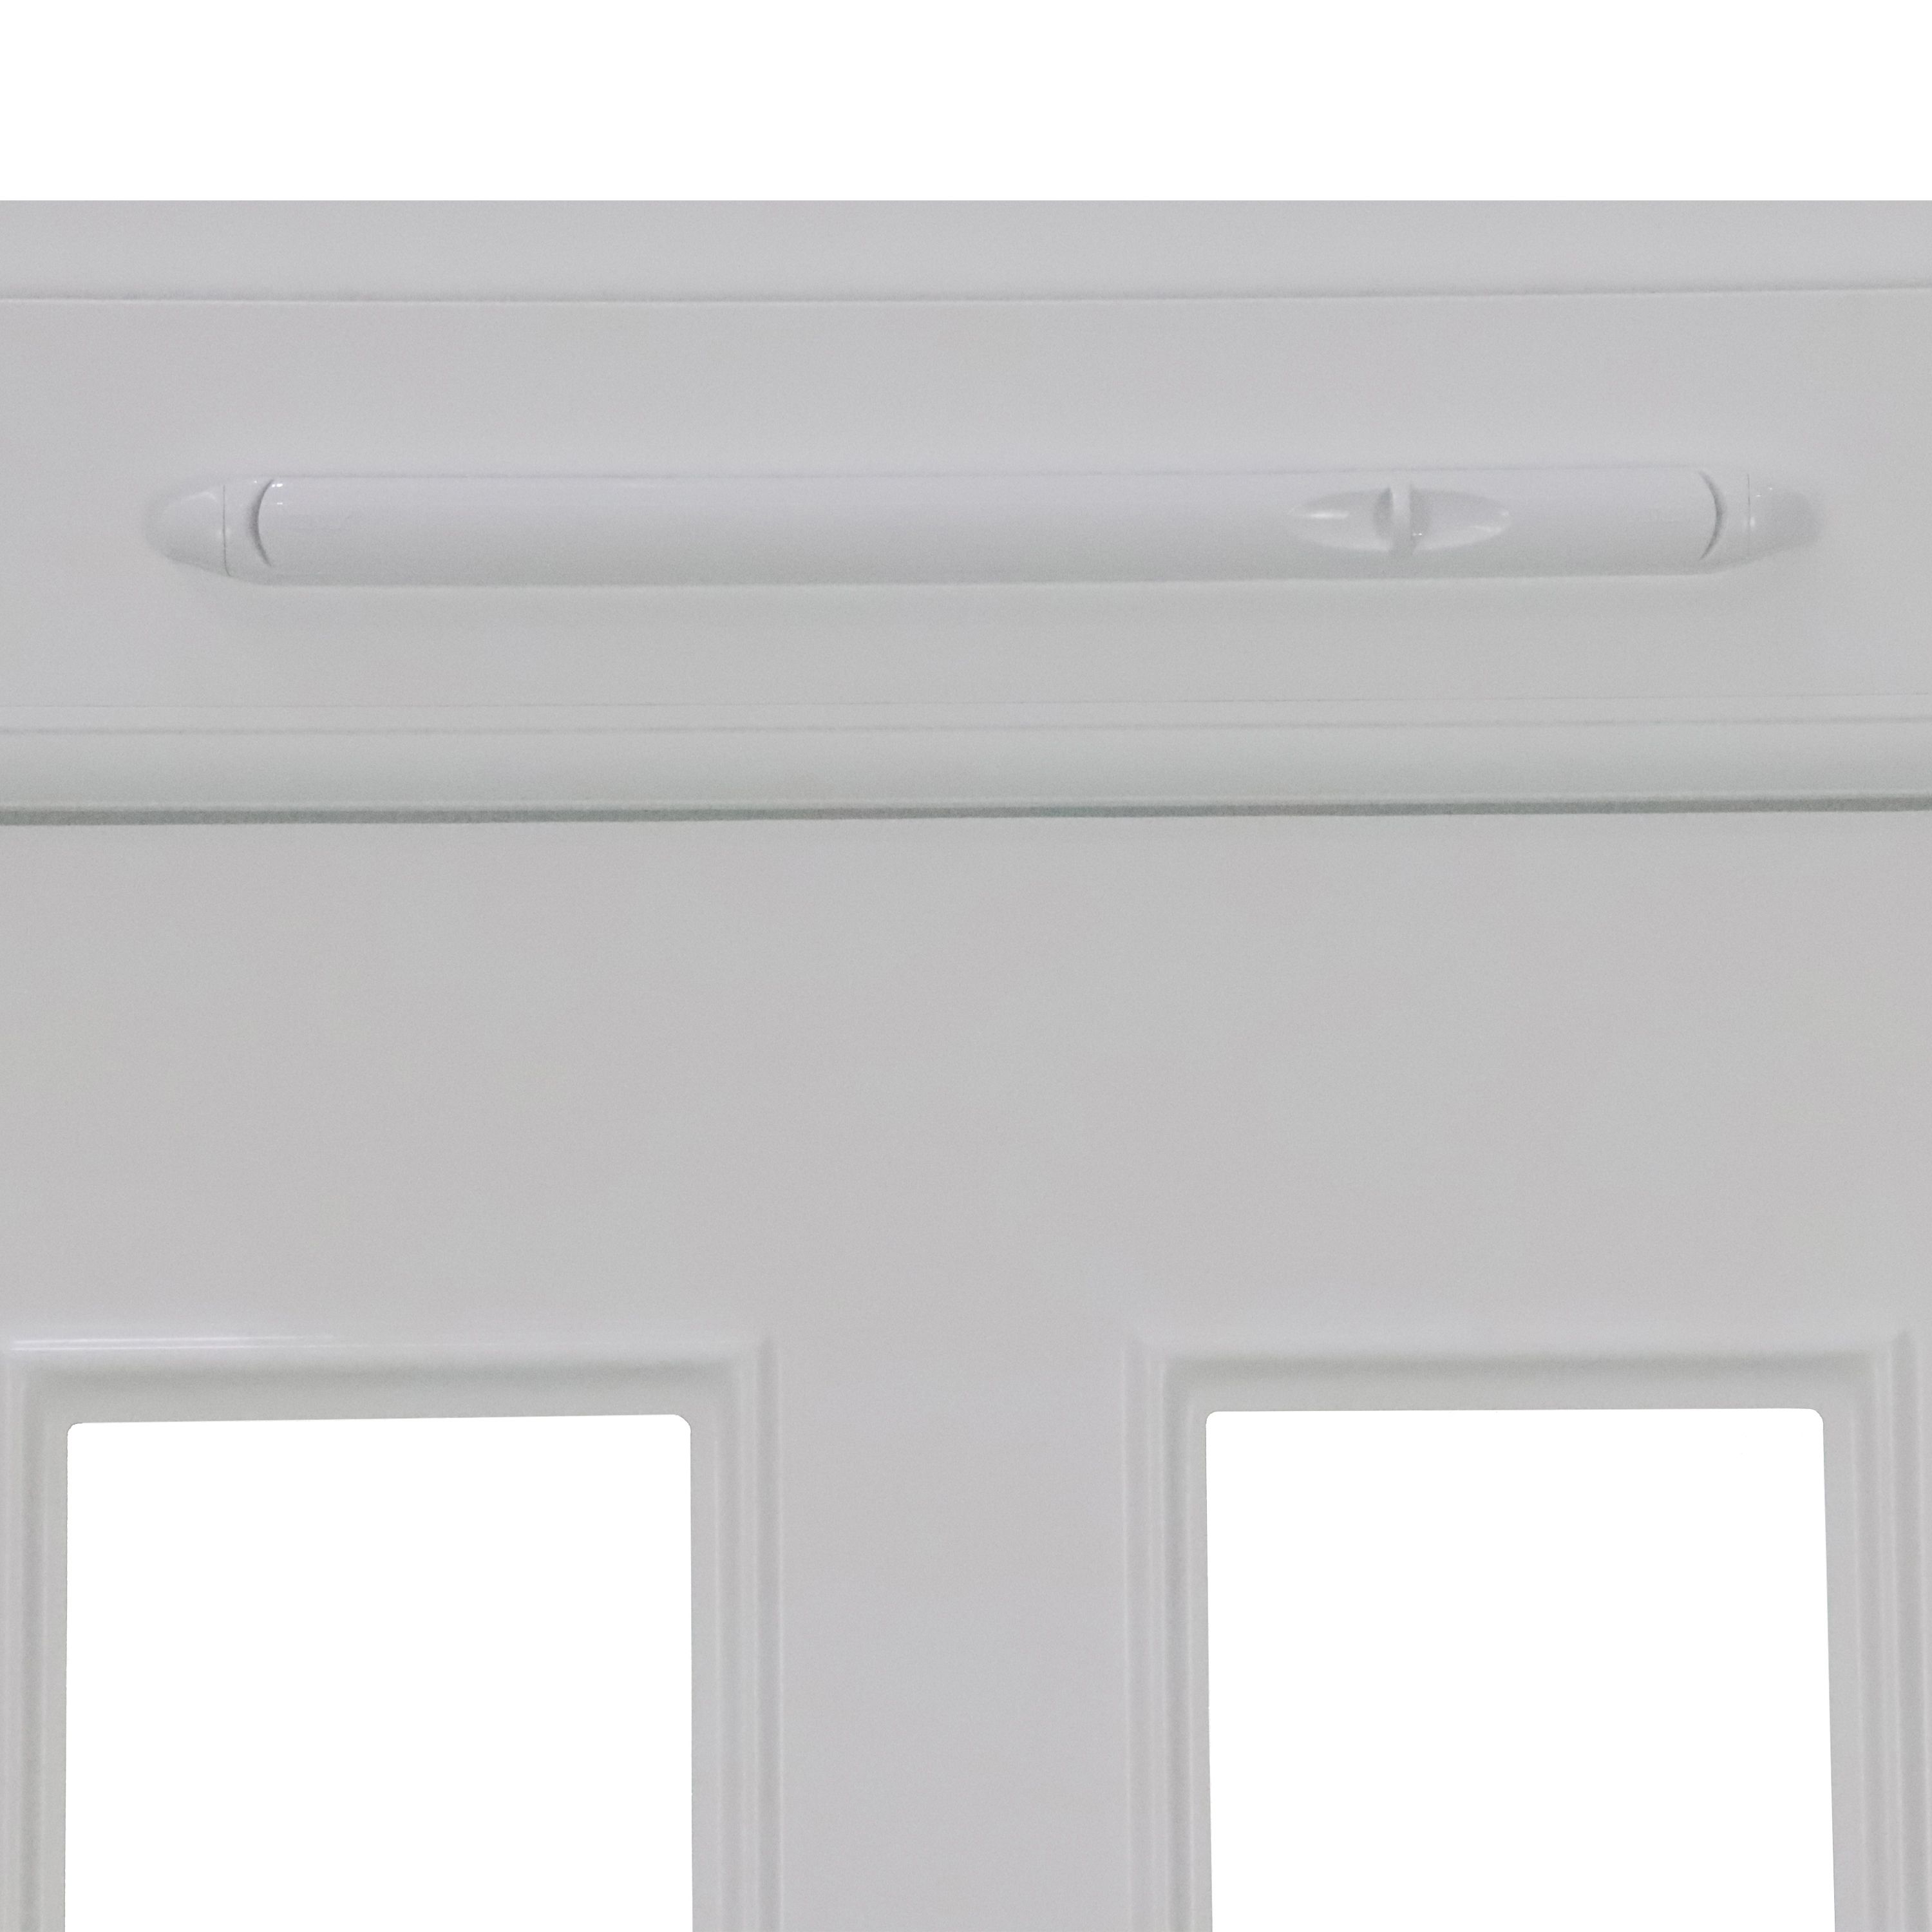 Fortia Chesil Frosted Glazed White RH External Front Door set, (H)2085mm (W)840mm